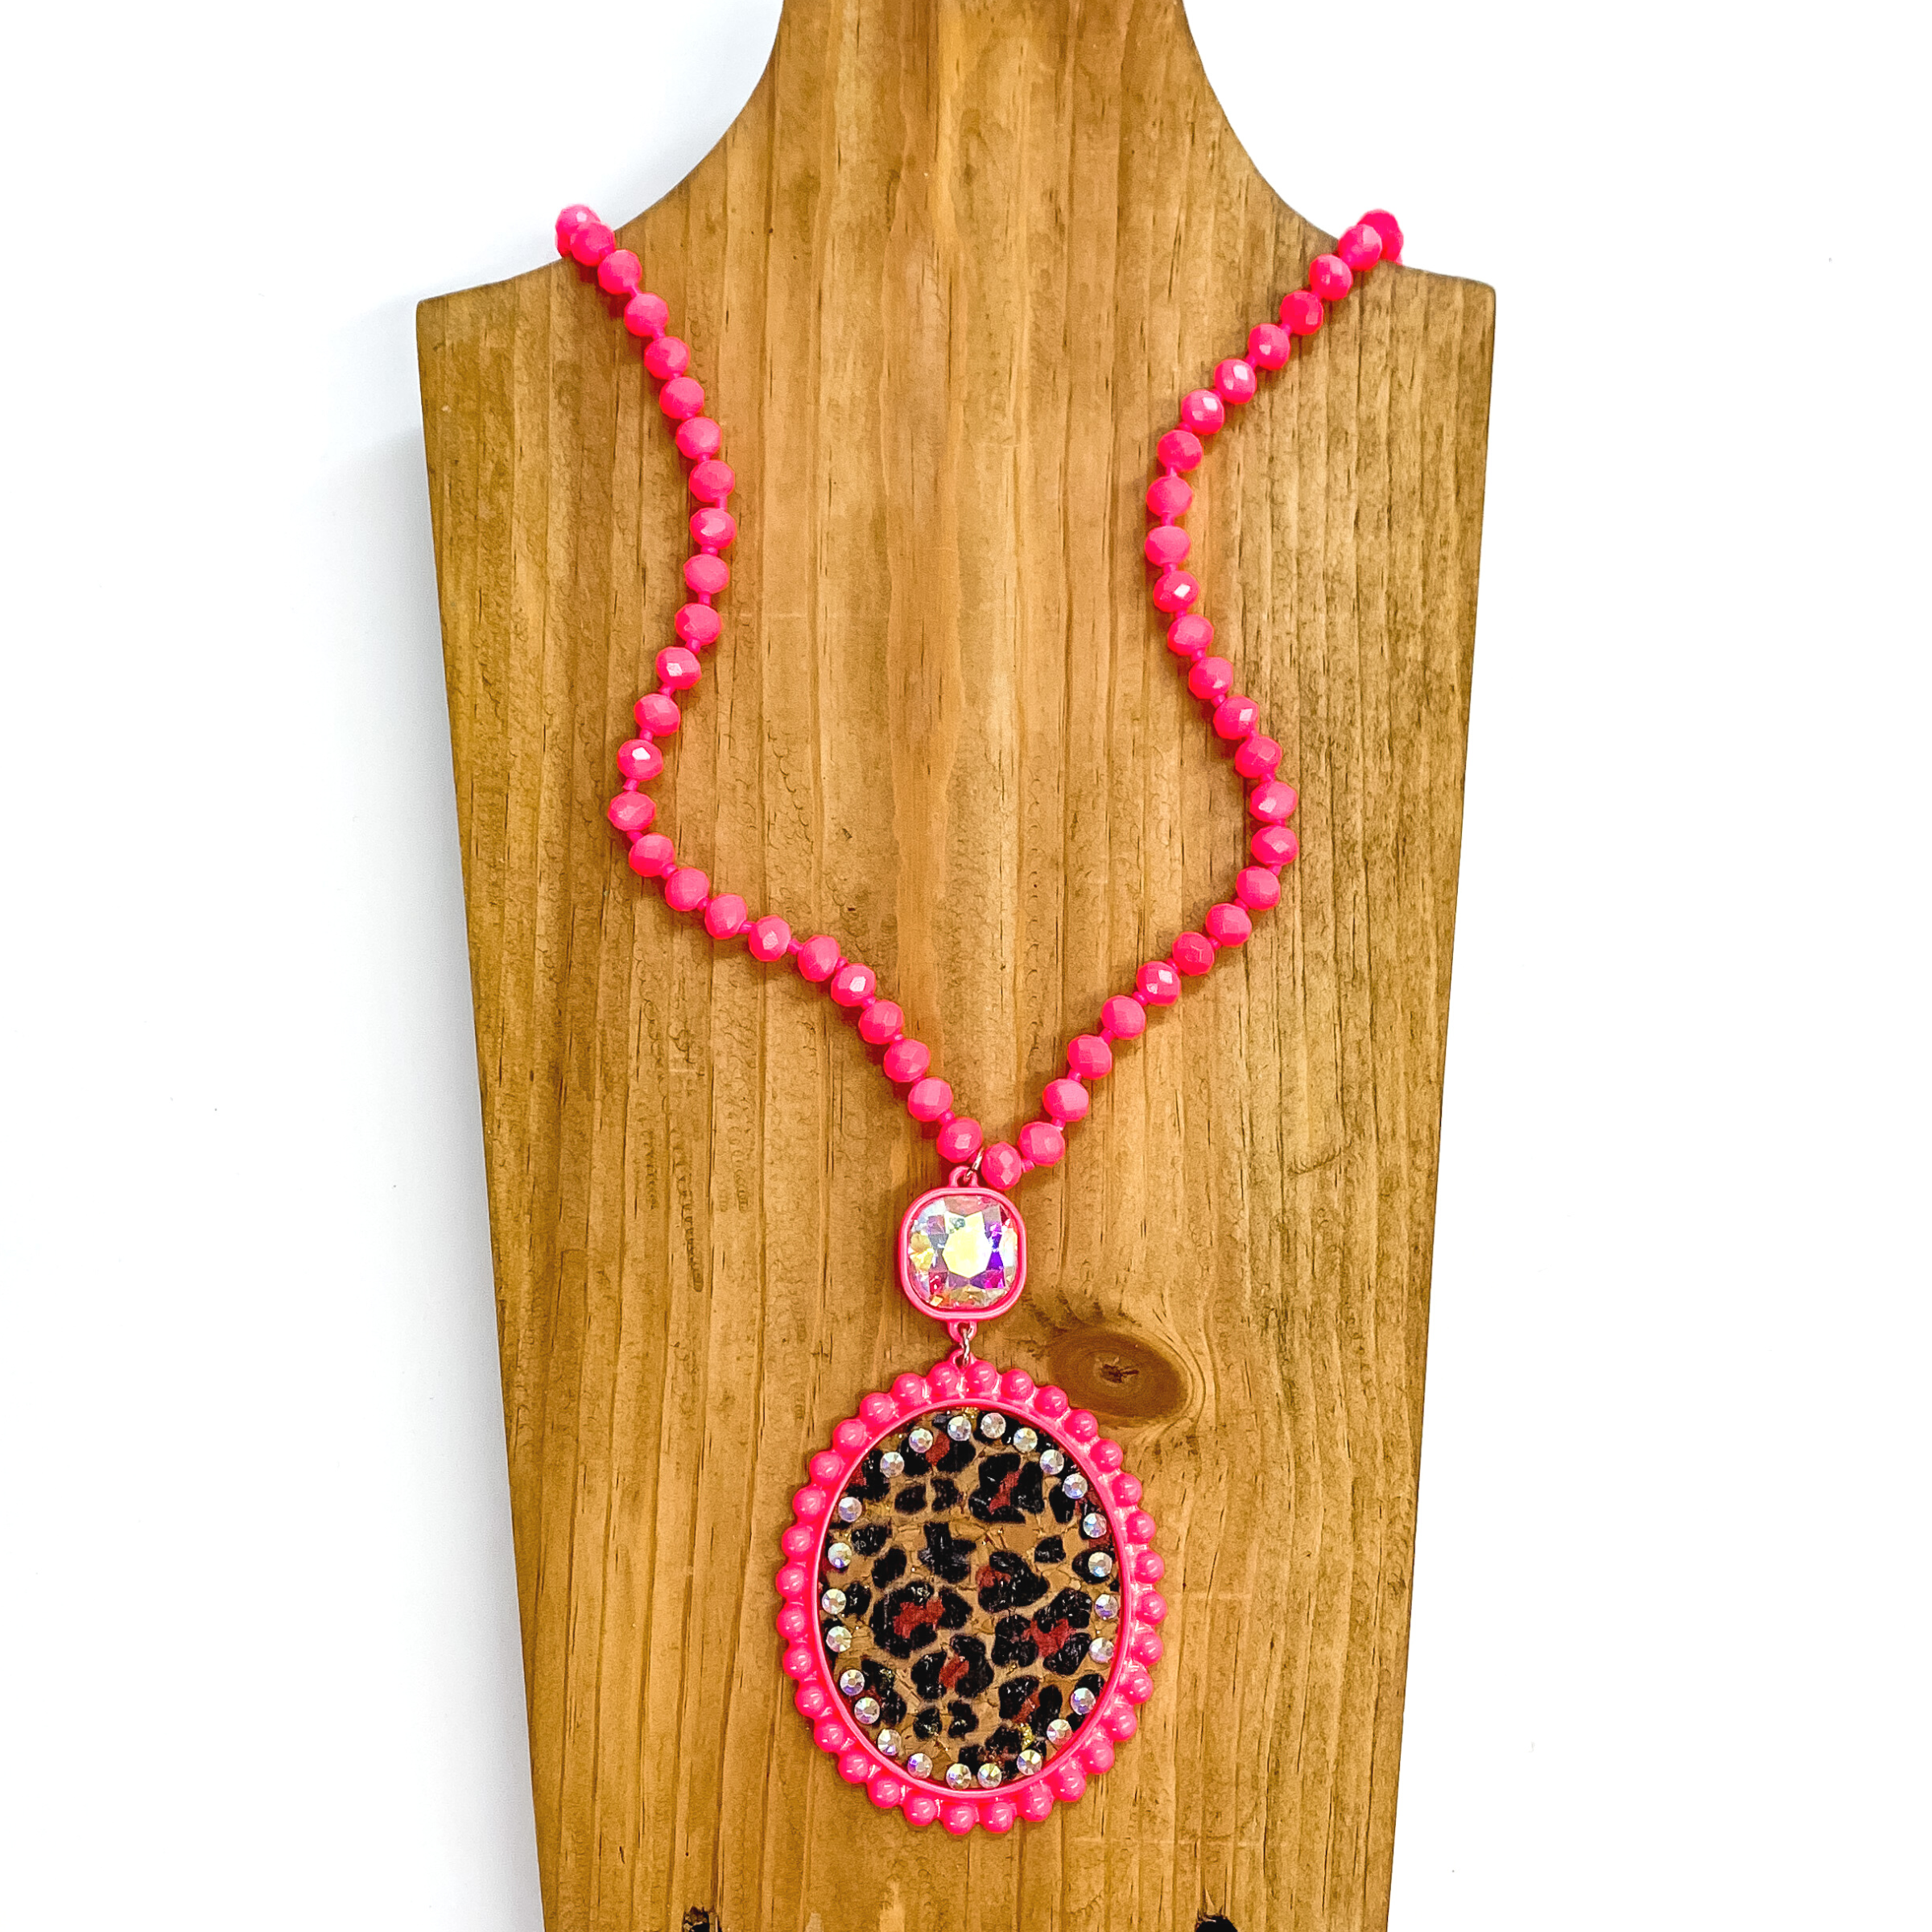 Long crystal beaded necklace in neon pink with a leopard print pendant  and AB cushion cut crystal connector. The pendant is in a neon pink setting,  the leopard print is on a cork material and has small AB crystals all  around. This necklace is taken laying on a brown necklace board and white  background.